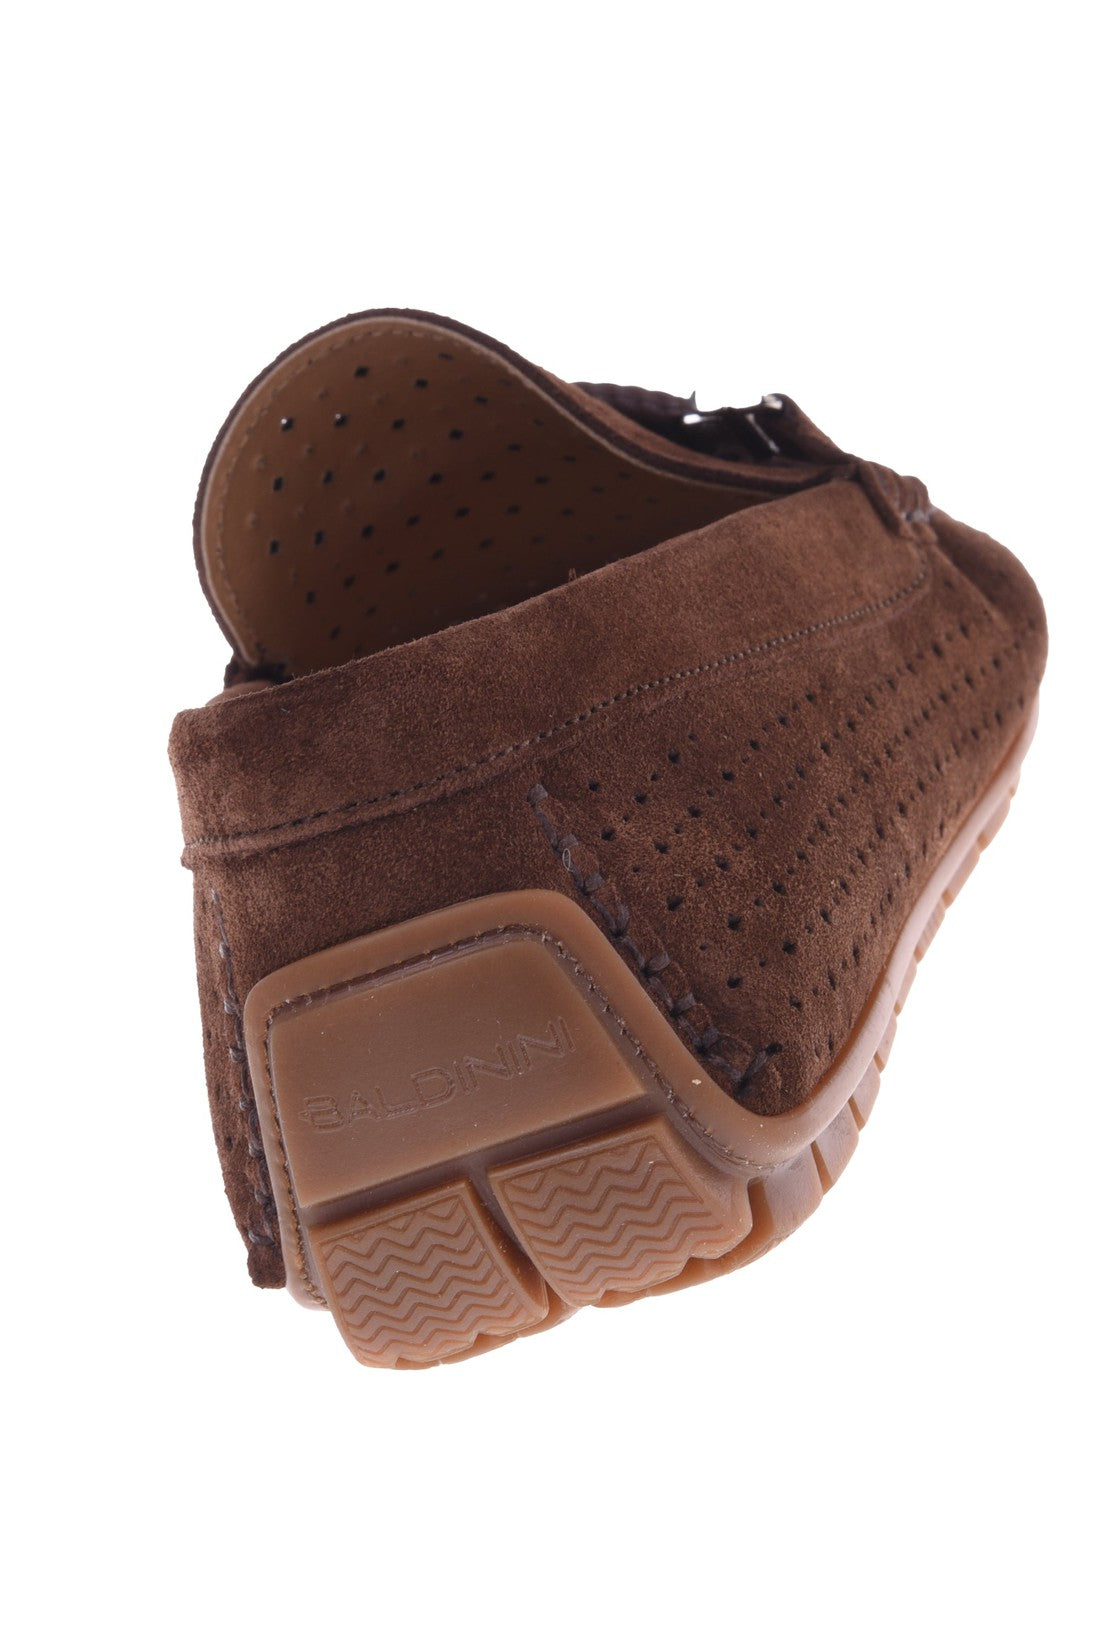 Loafer in brown perforated suede